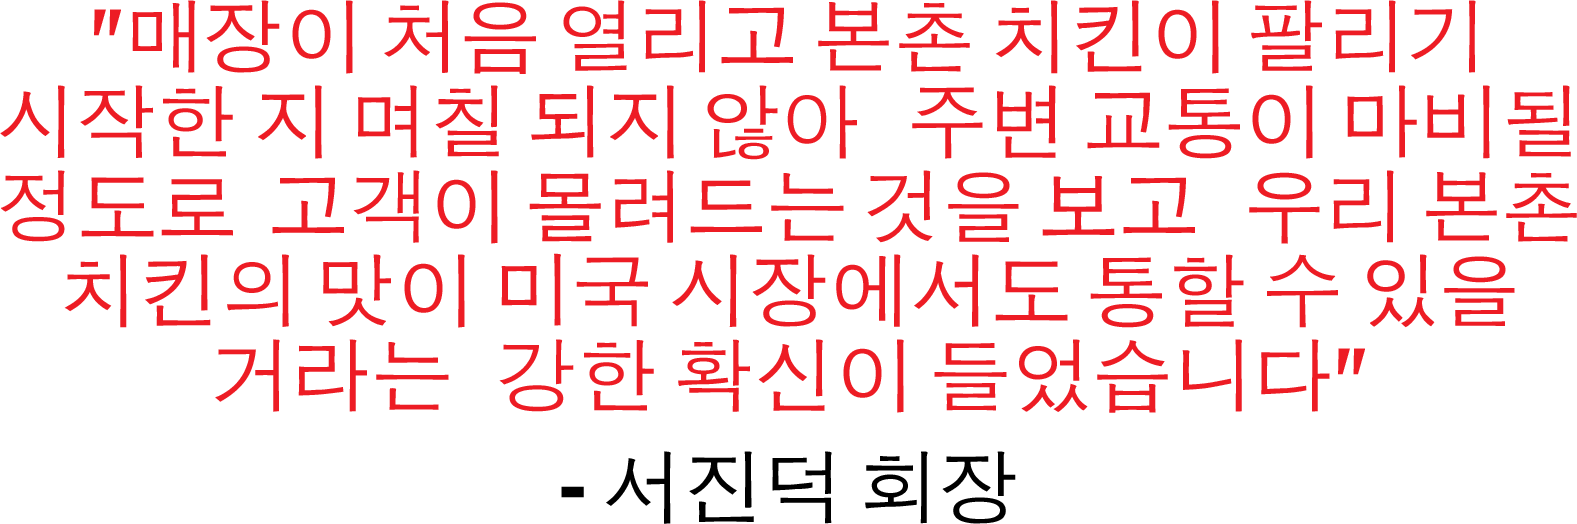 Our Story Quote -Korean